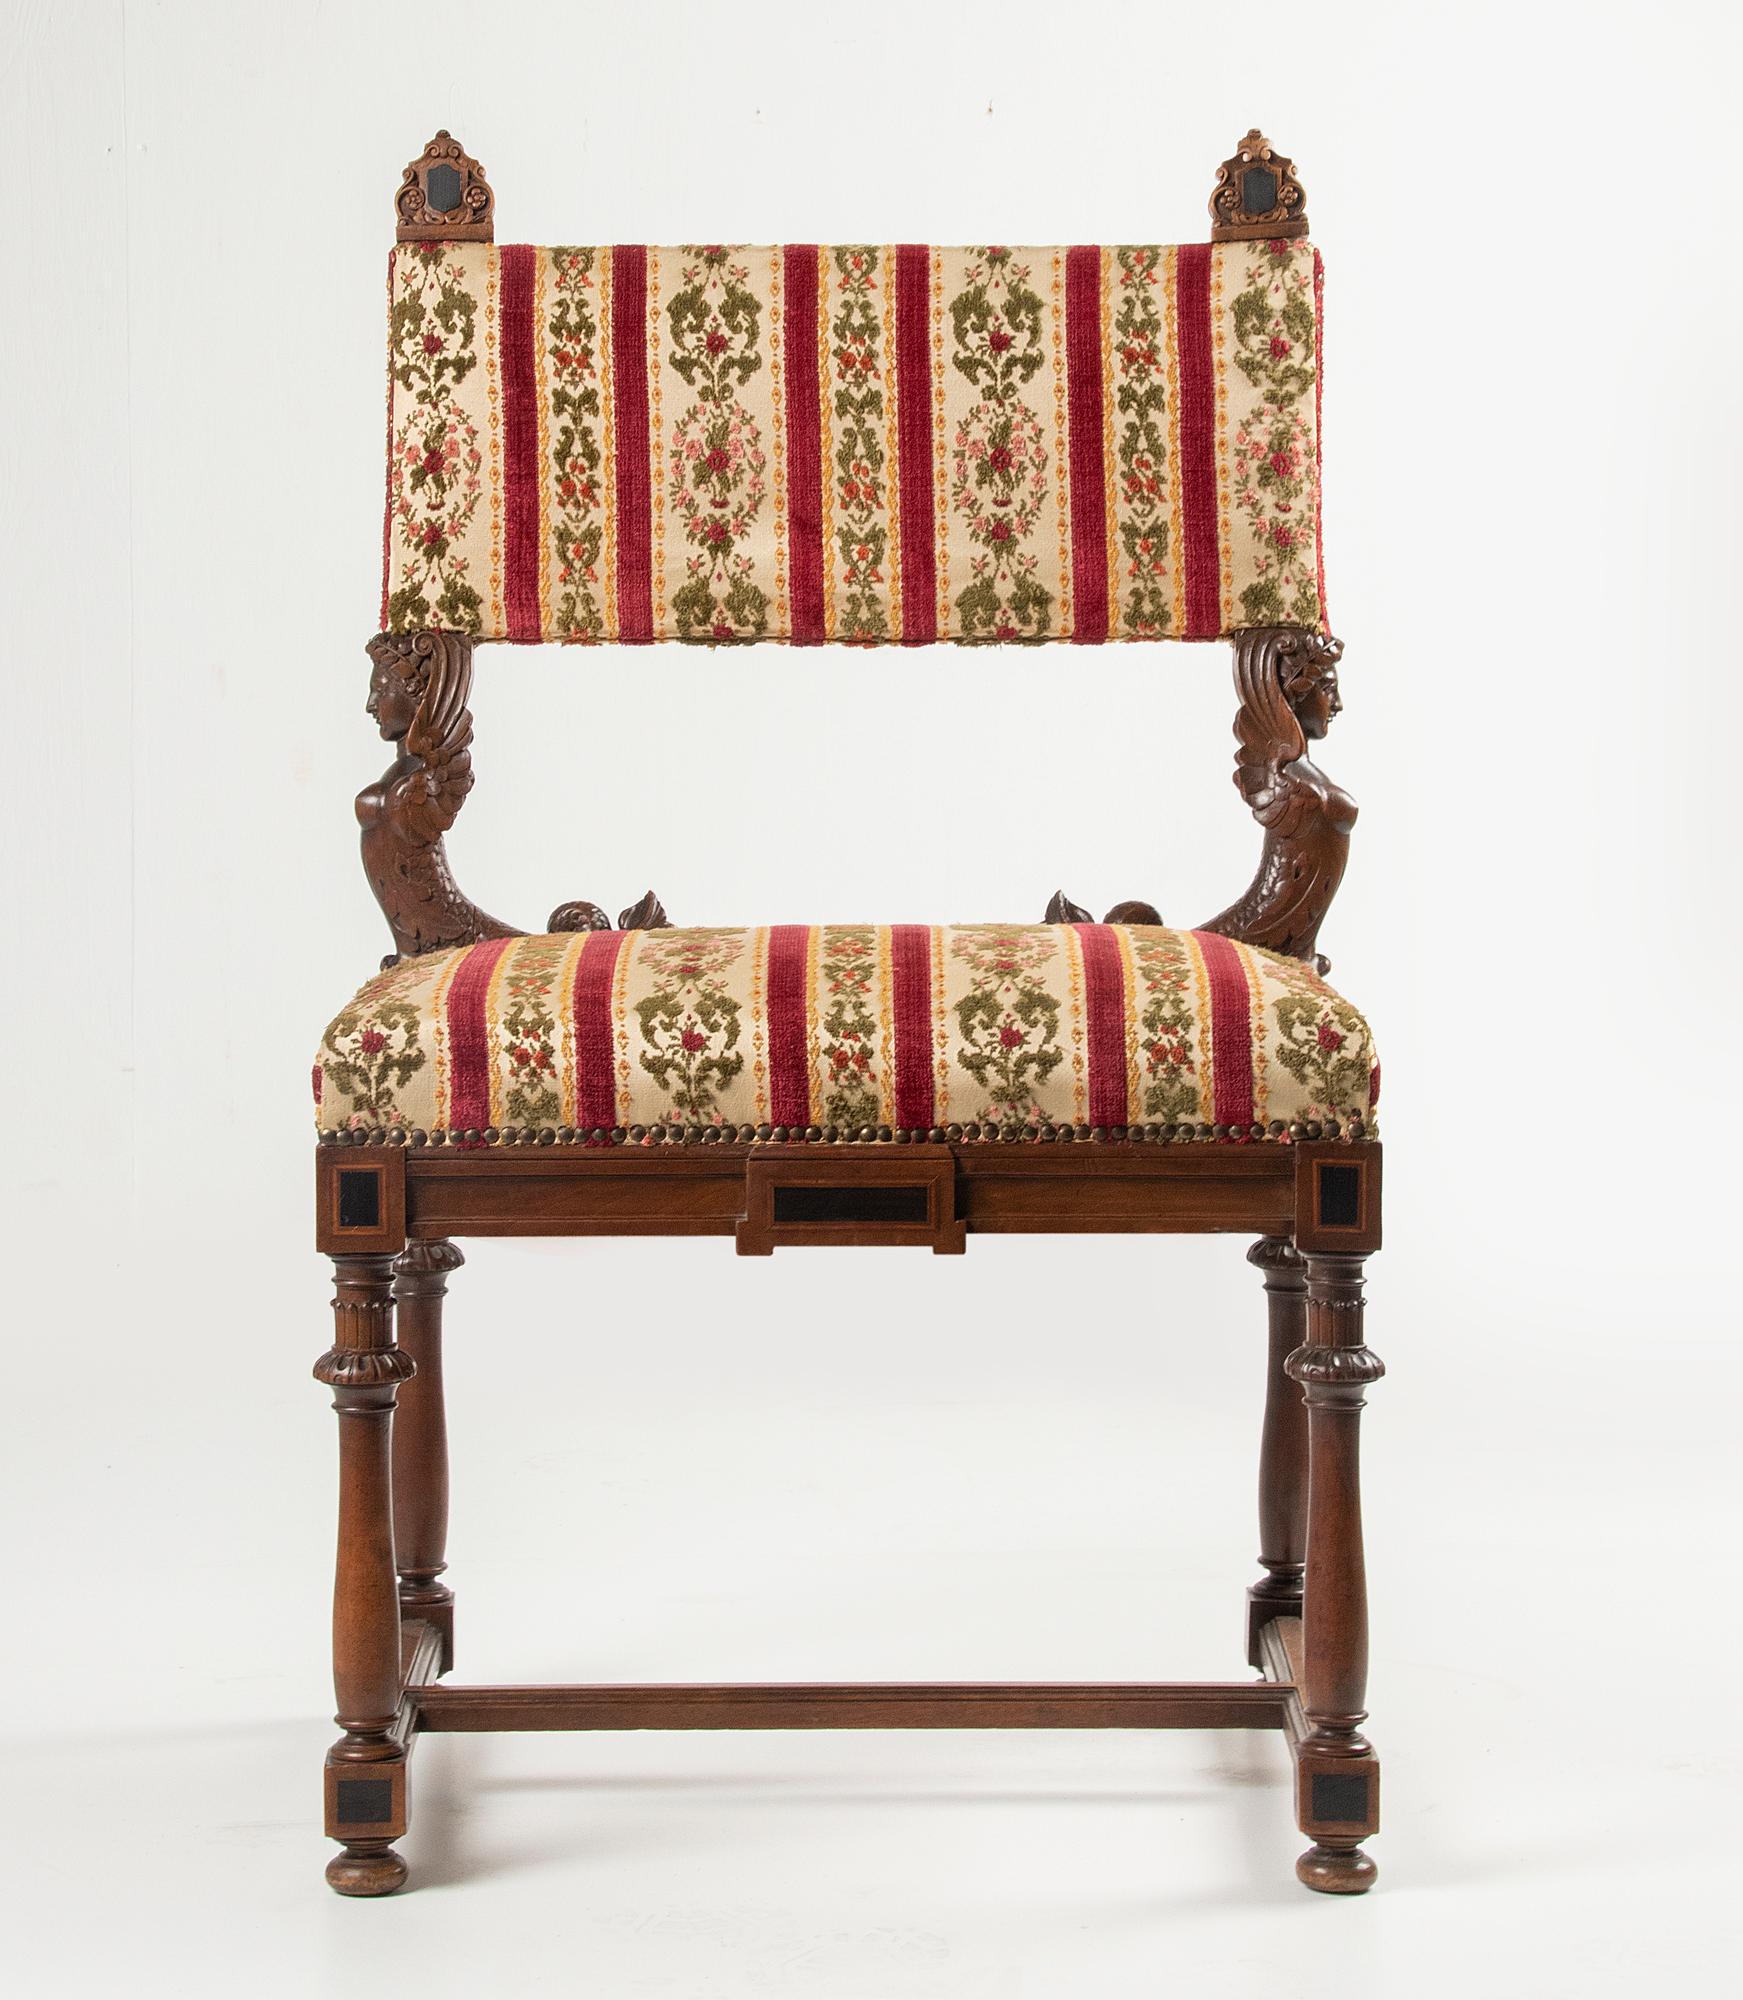 A large antique chair in Renaissance style, also called Henri II style. The chair is made of sculpted walnut wood. Ebonised wood and inlay work on the corners and top ornaments. The back rests on two refined sculpted mermaids. The chair had been